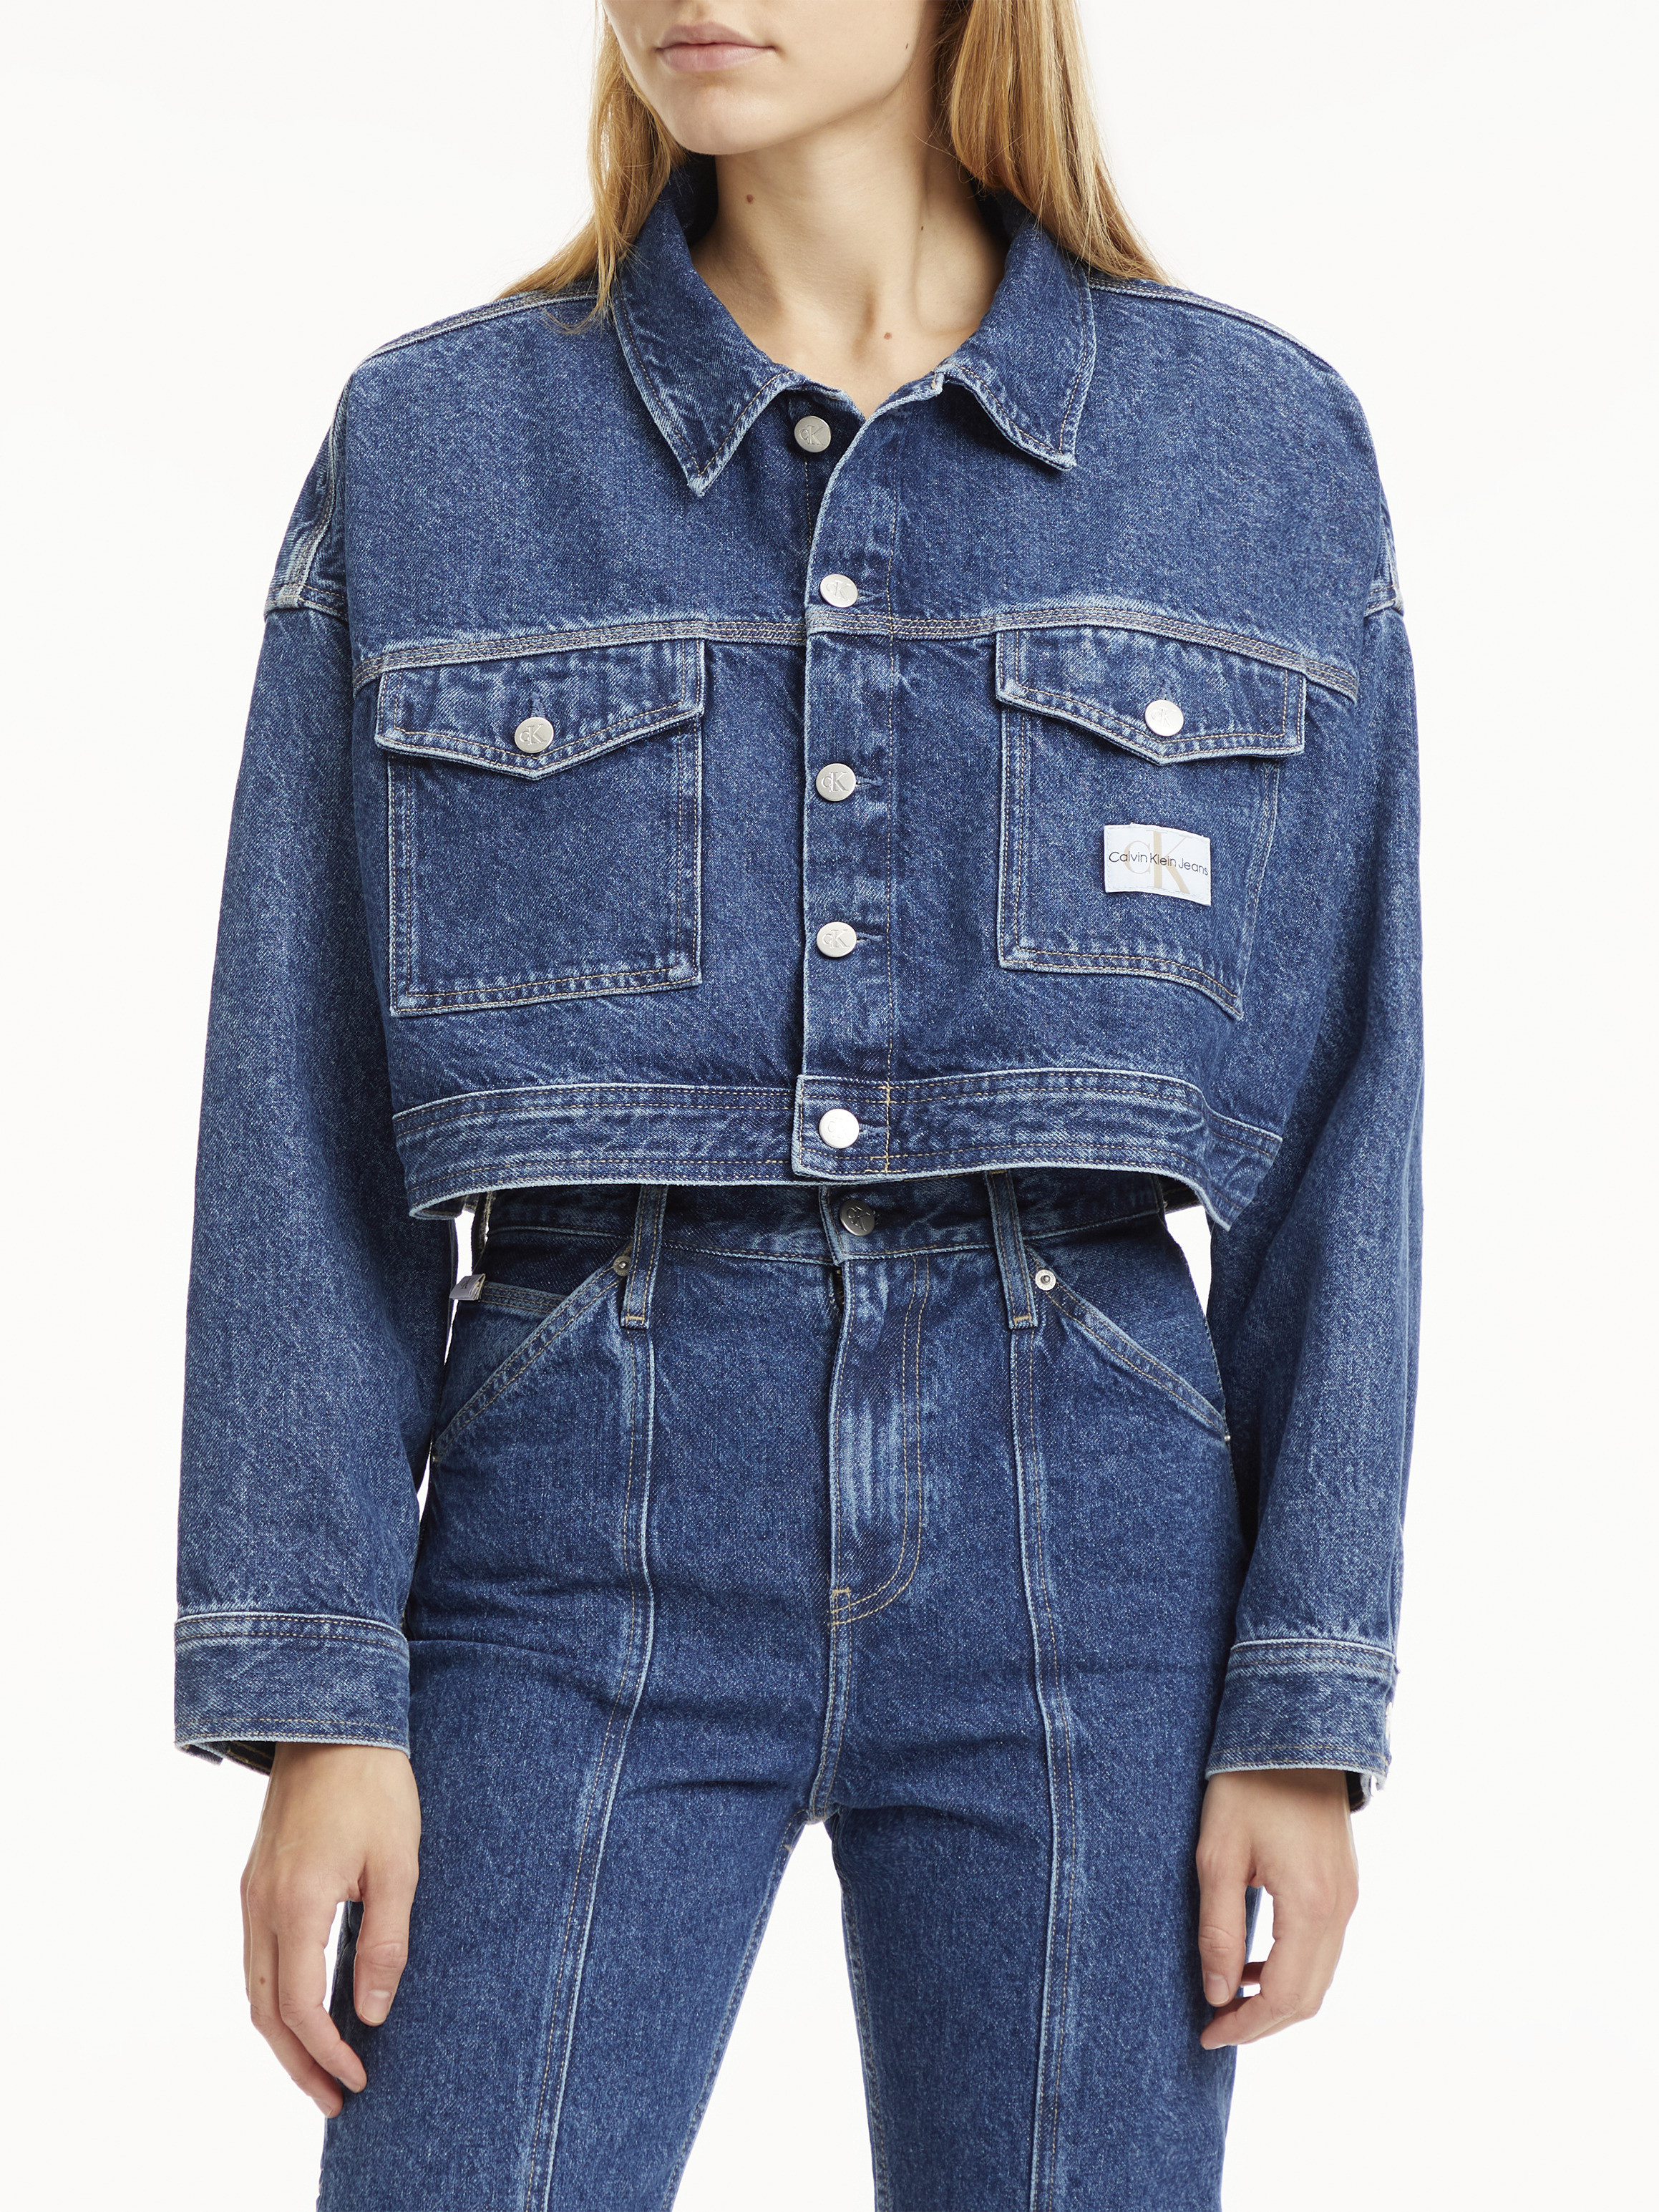 Calvin Klein Jeans - Cropped relaxed-fit jacket in denim, Denim, large image number 3